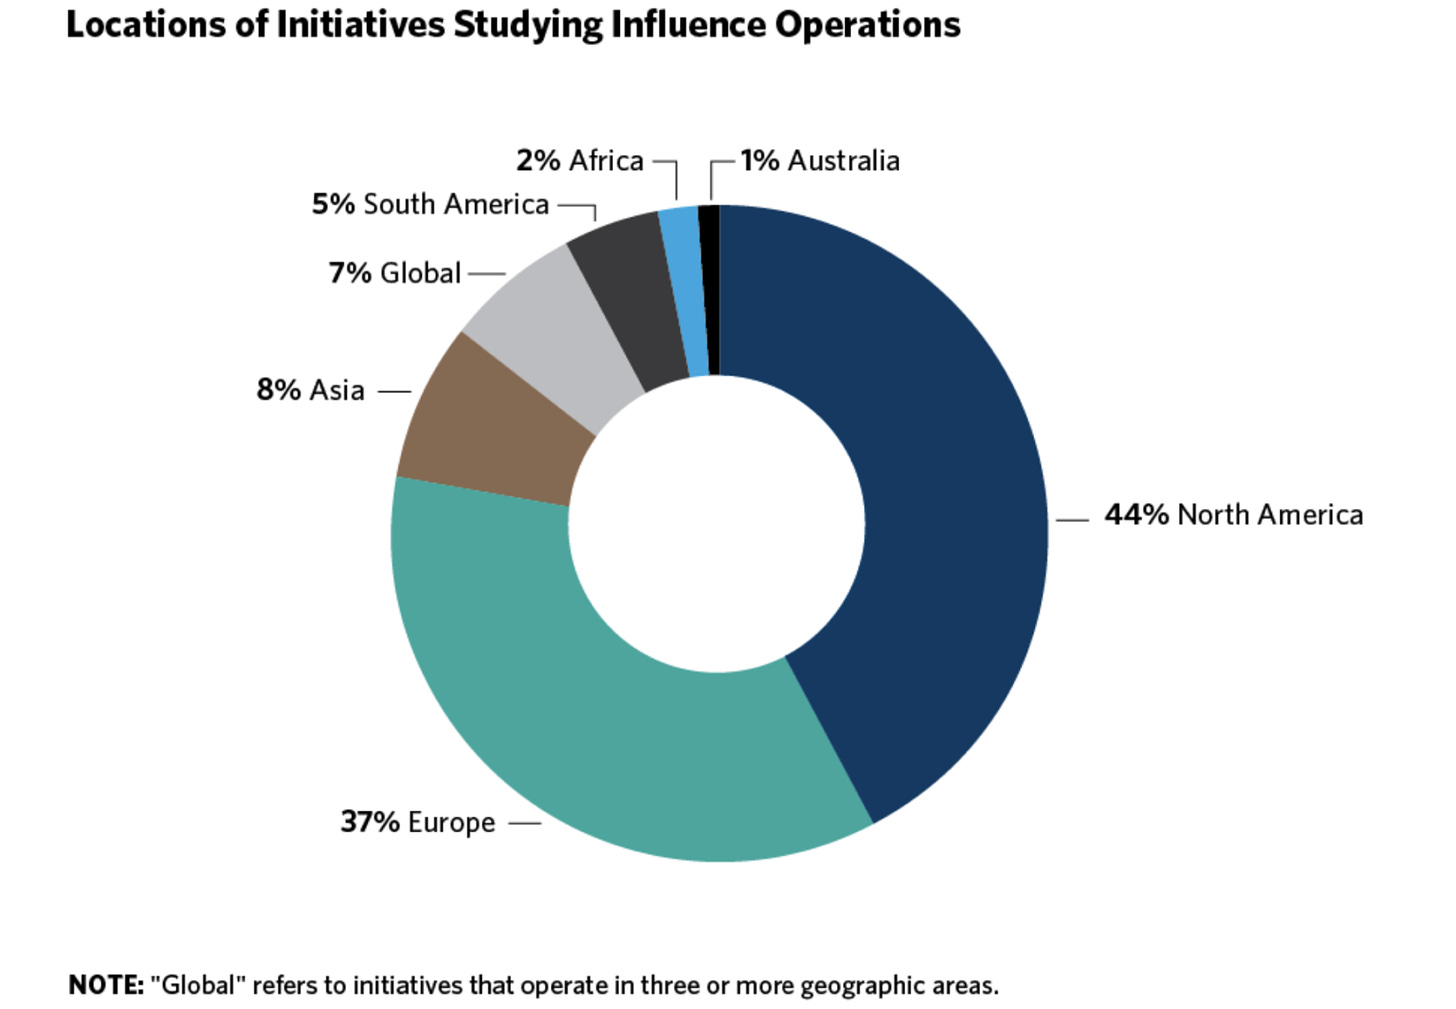 Location of Initiatives Studying Influence Operations